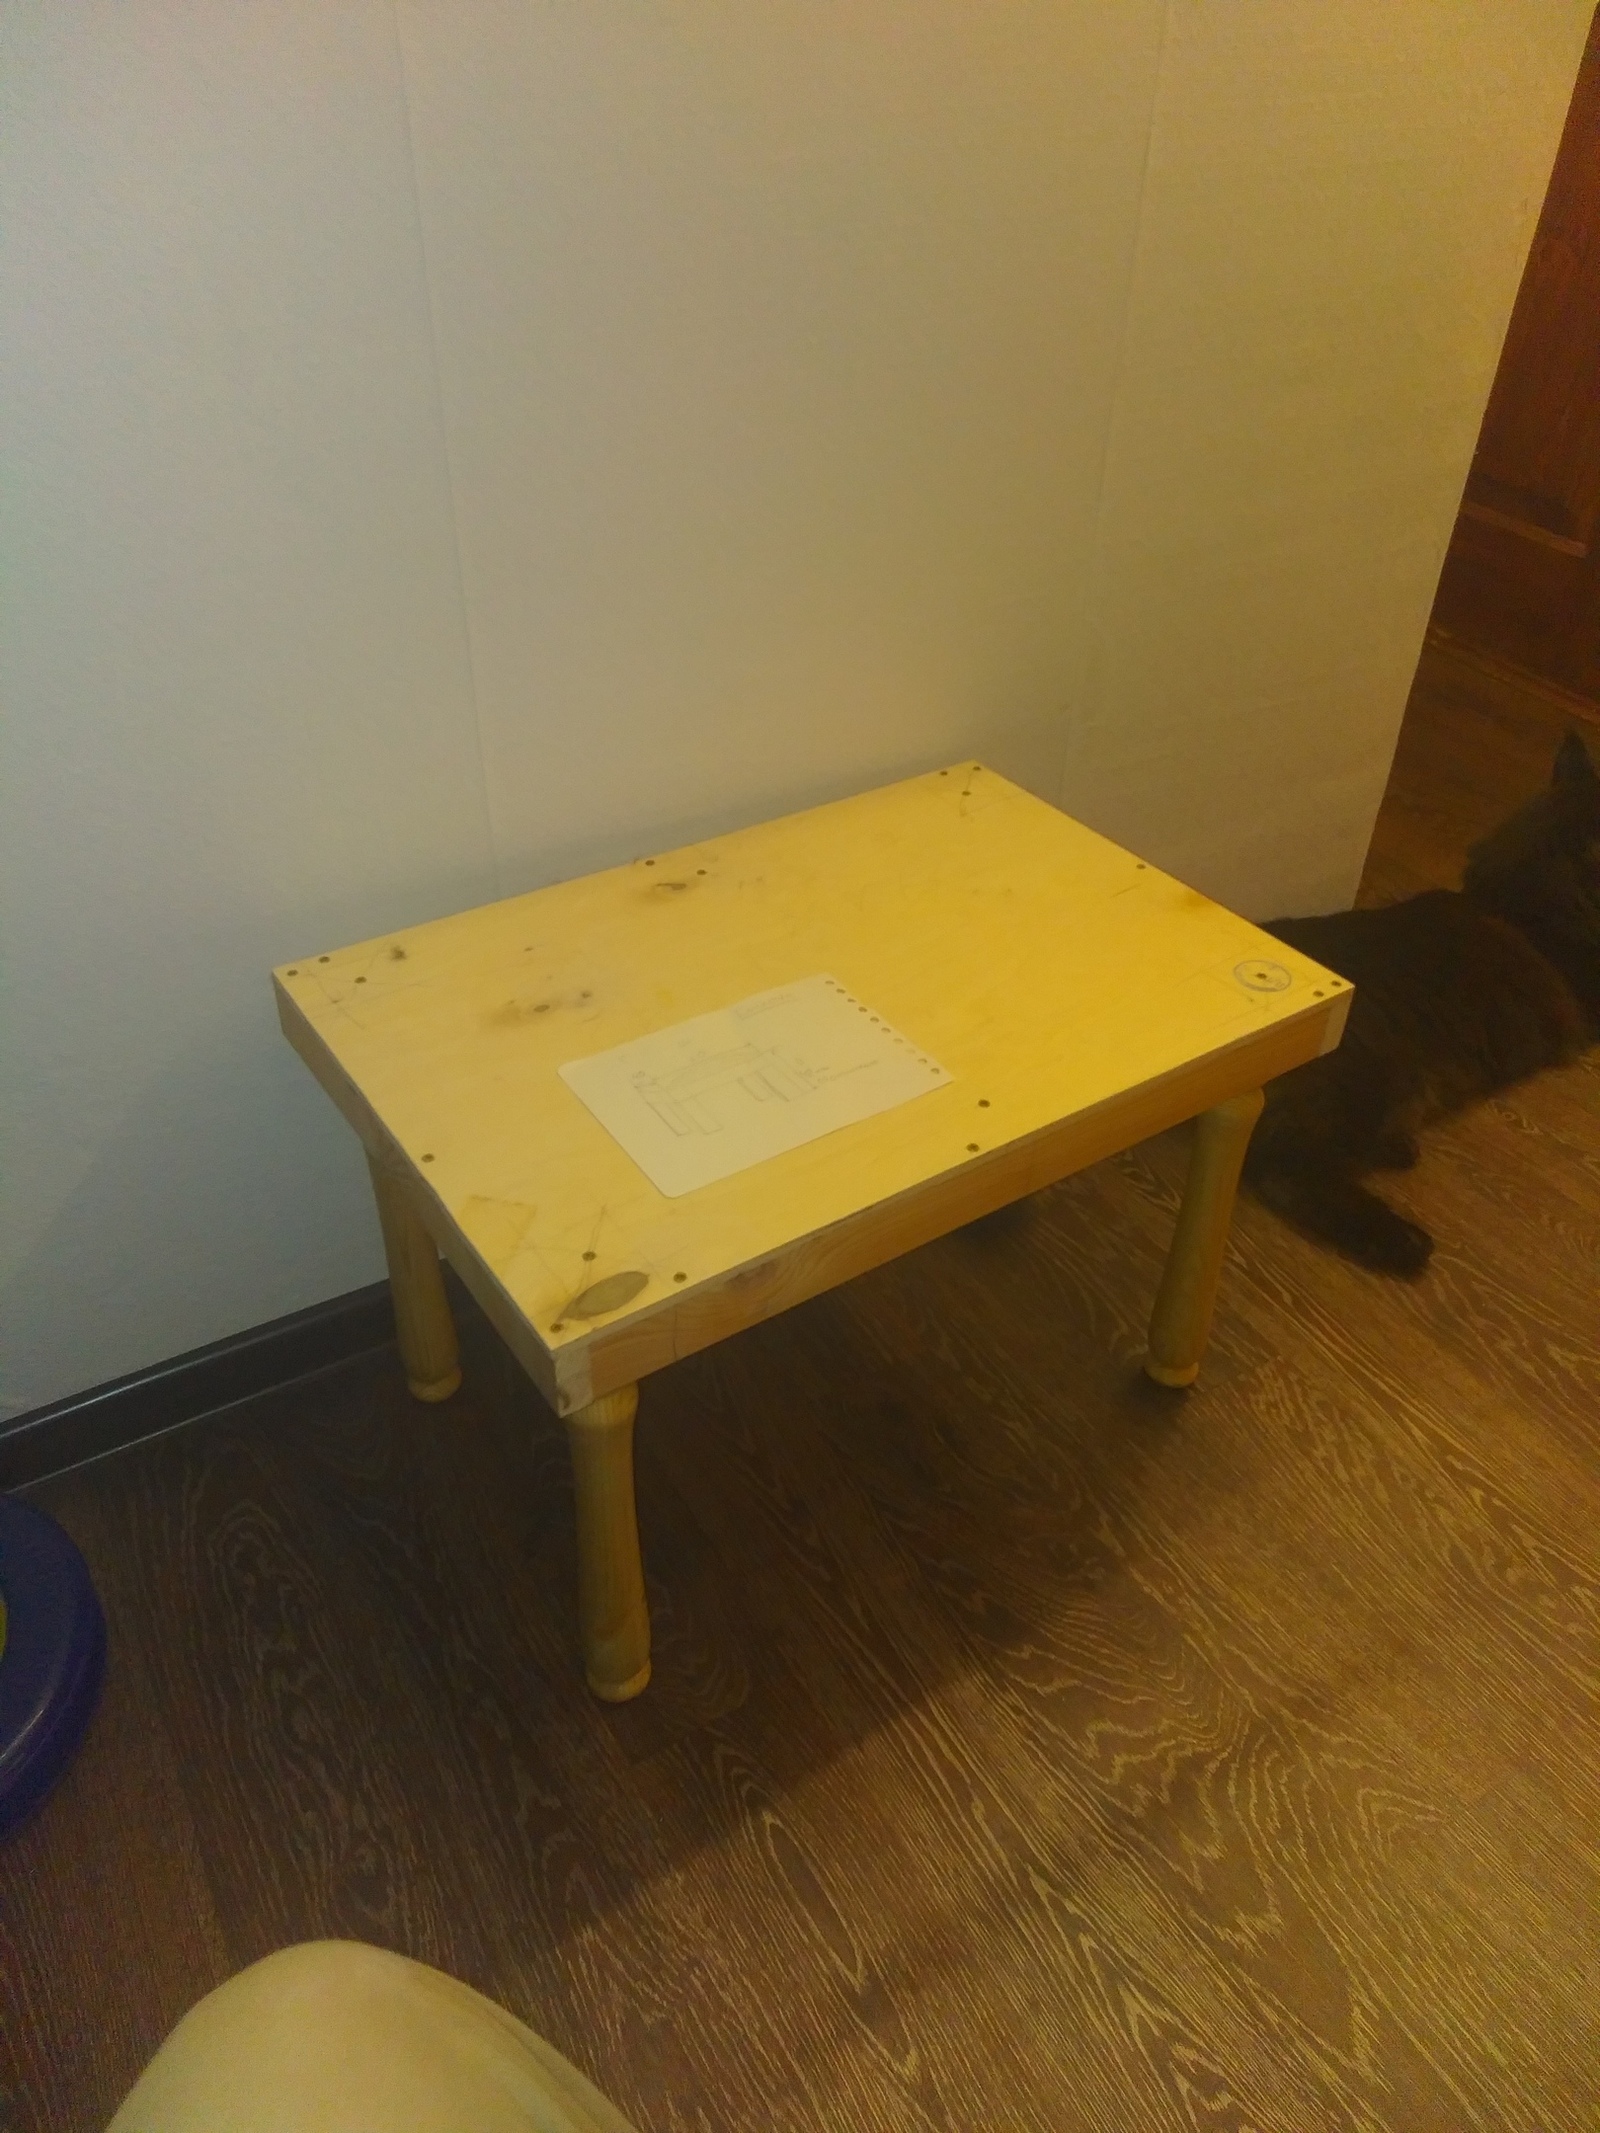 Do-it-yourself budget bench - My, Post #10232124, With your own hands, Longpost